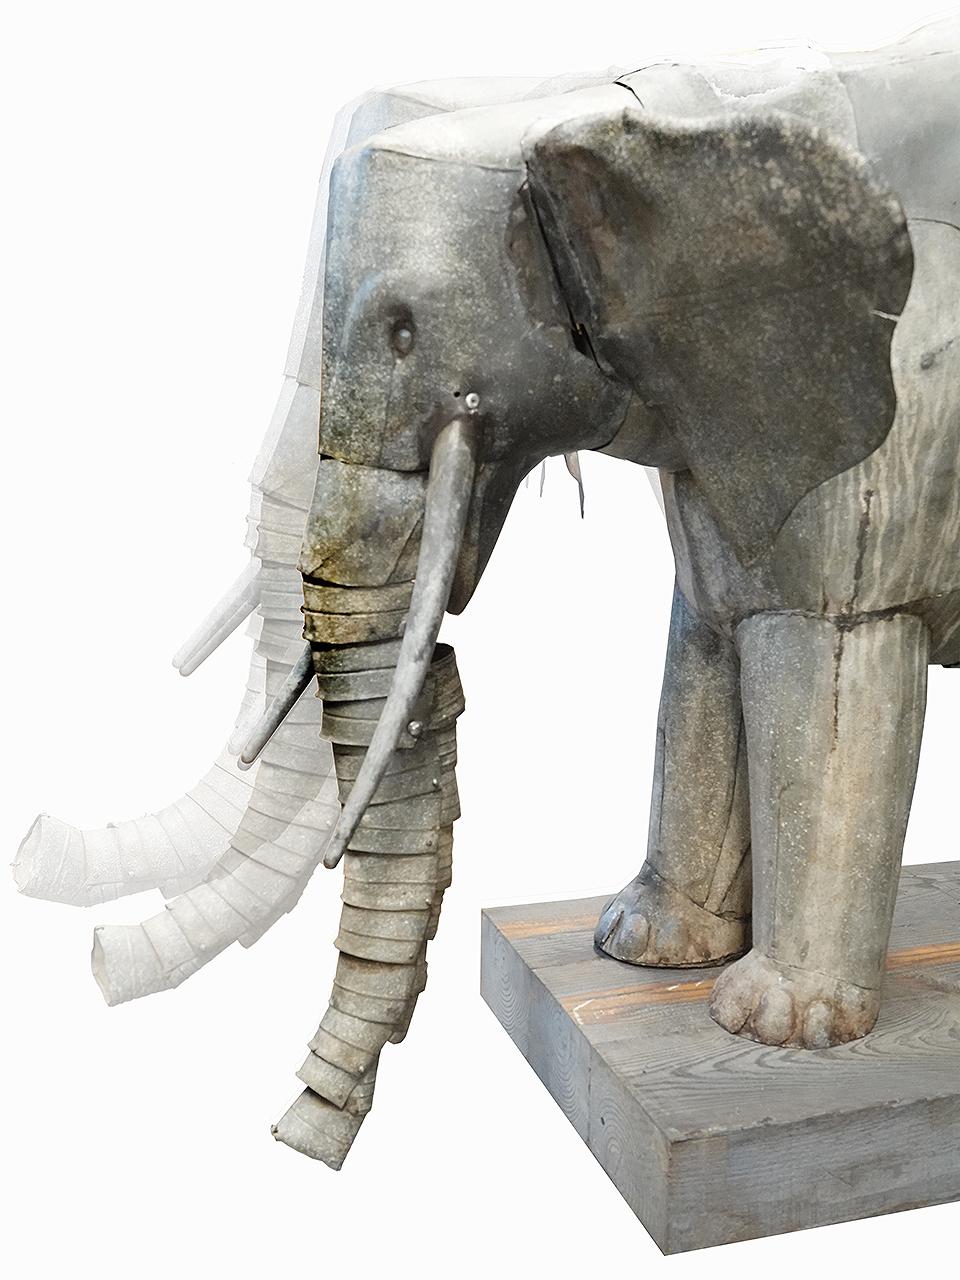 175 years ago this was created as a fountain that worked on water and counter weights. The elephant can now be plugged in and runs on dry land using a motor, cables and gears. The head moves up and down and the trunk curls up looking very life like.